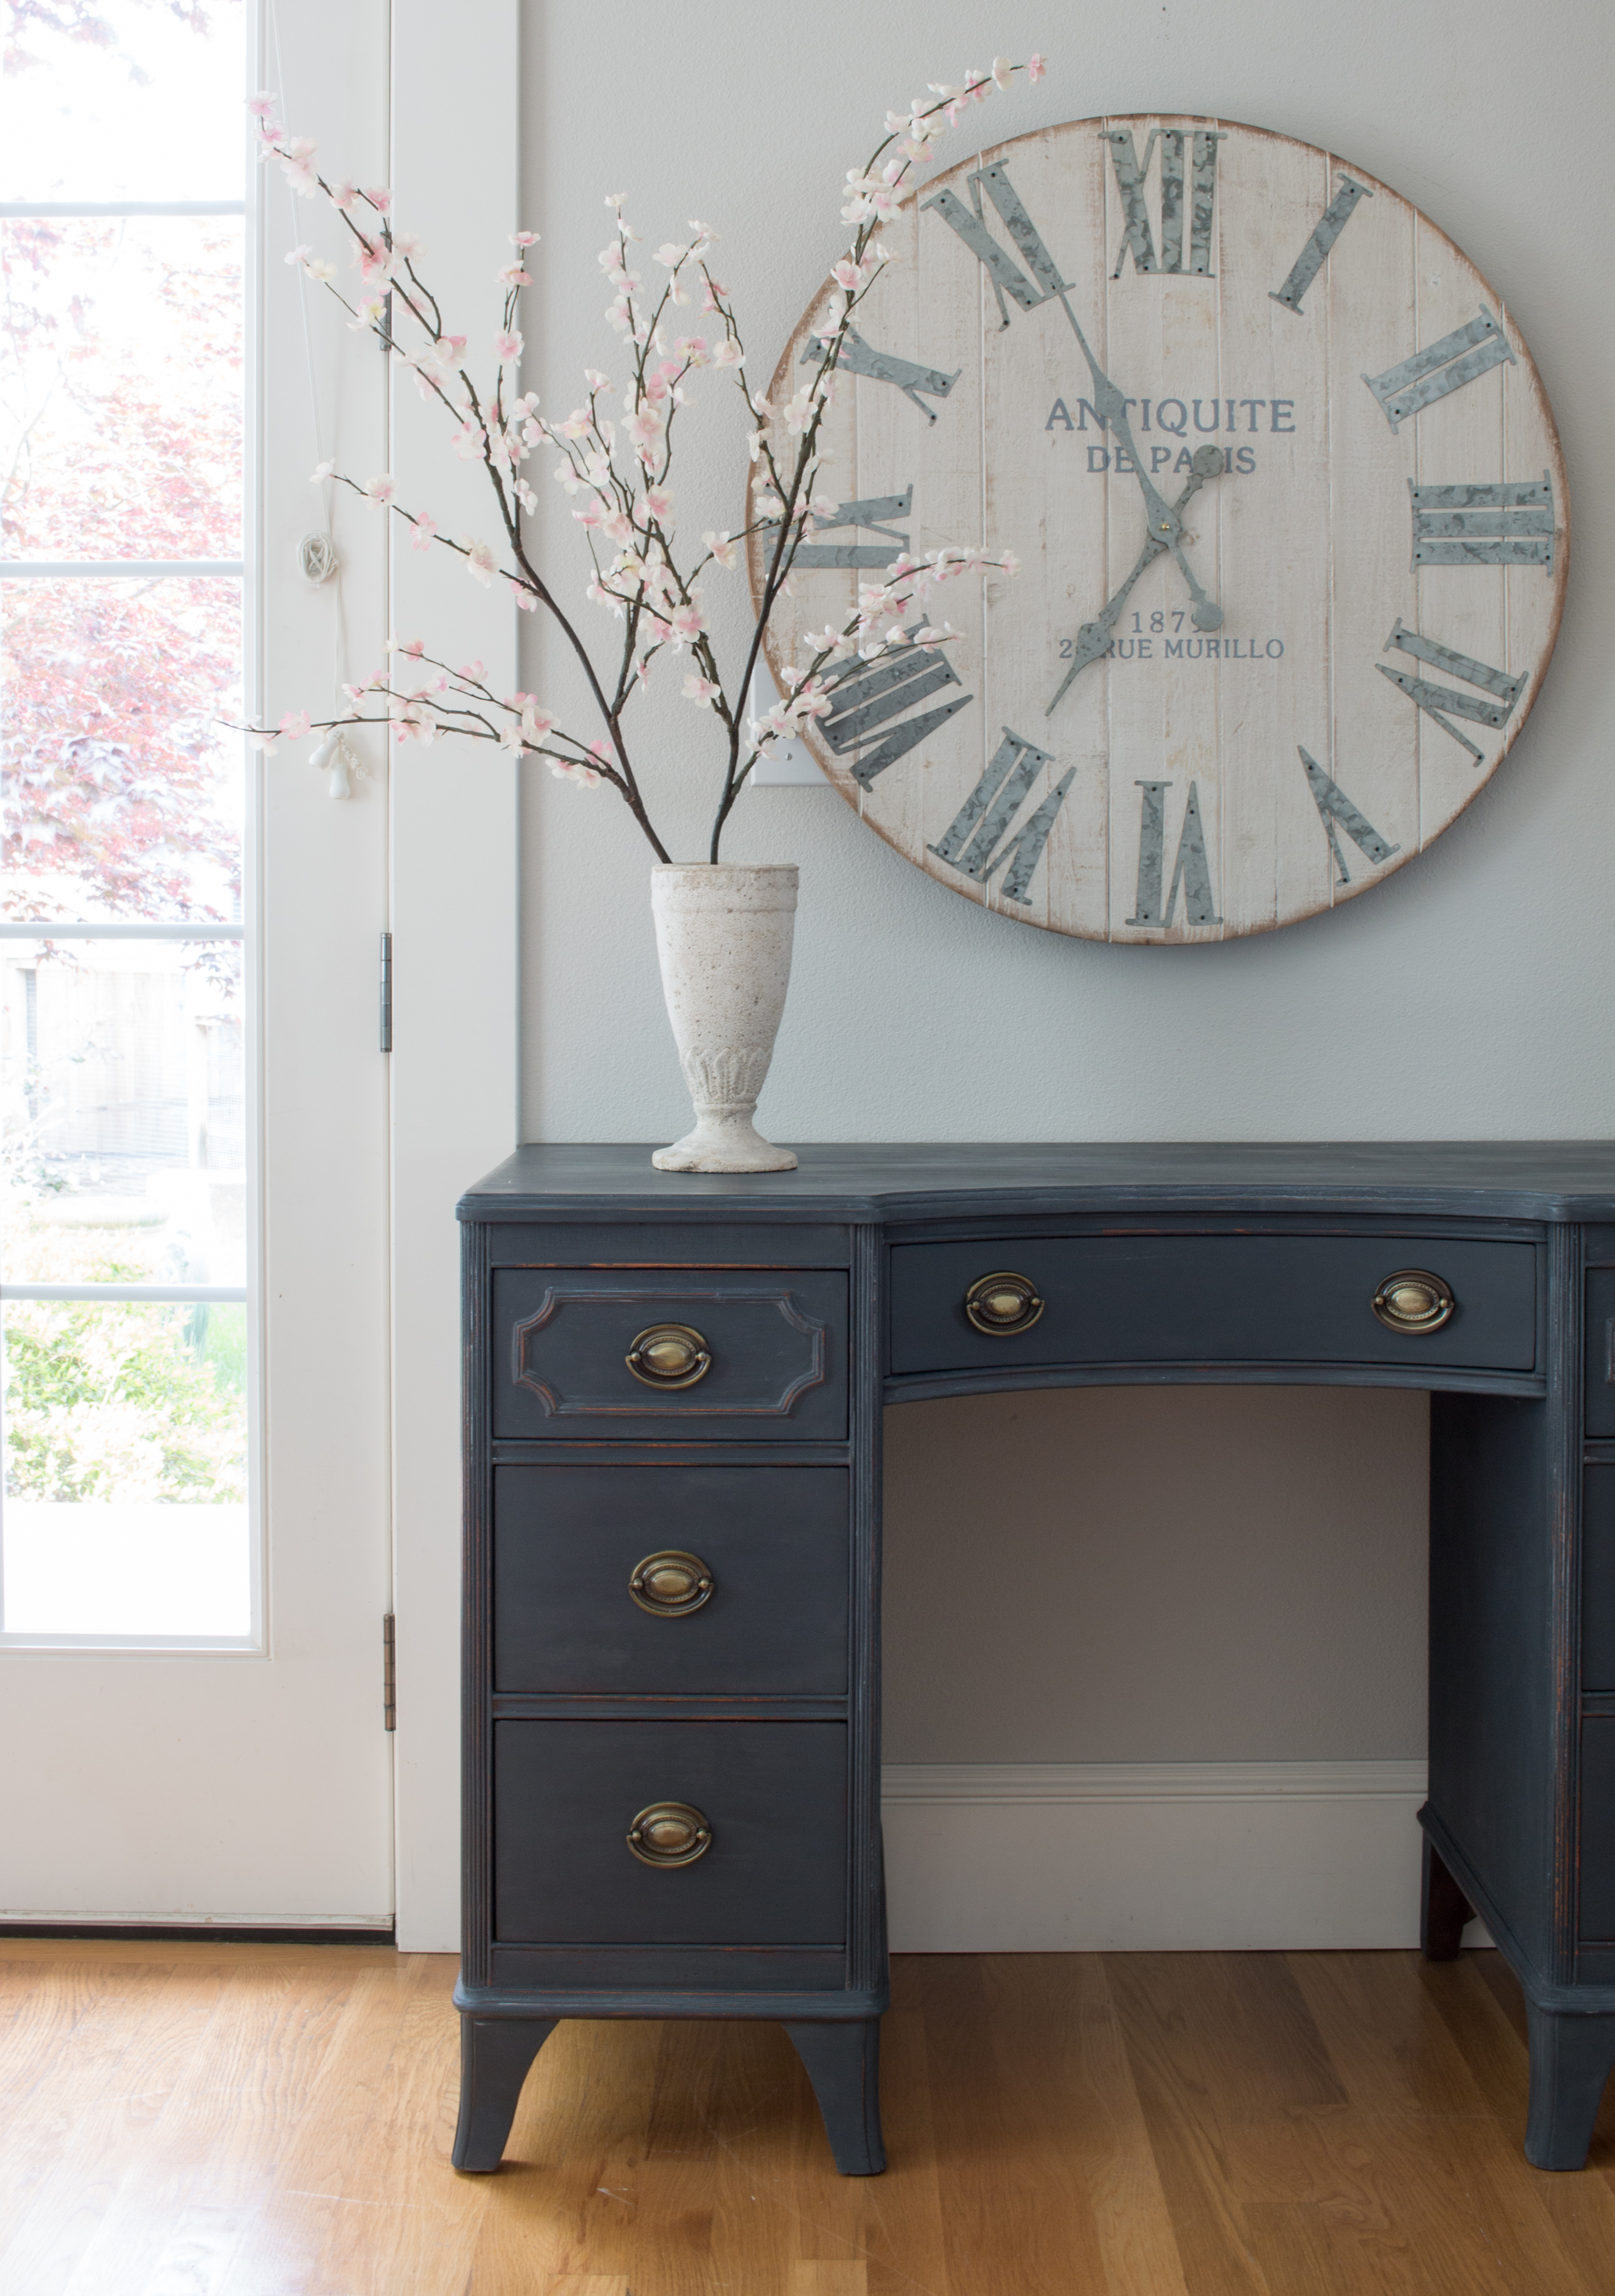 Vintage Desk Makeover With Pier One Clock Saw Nail And Paint